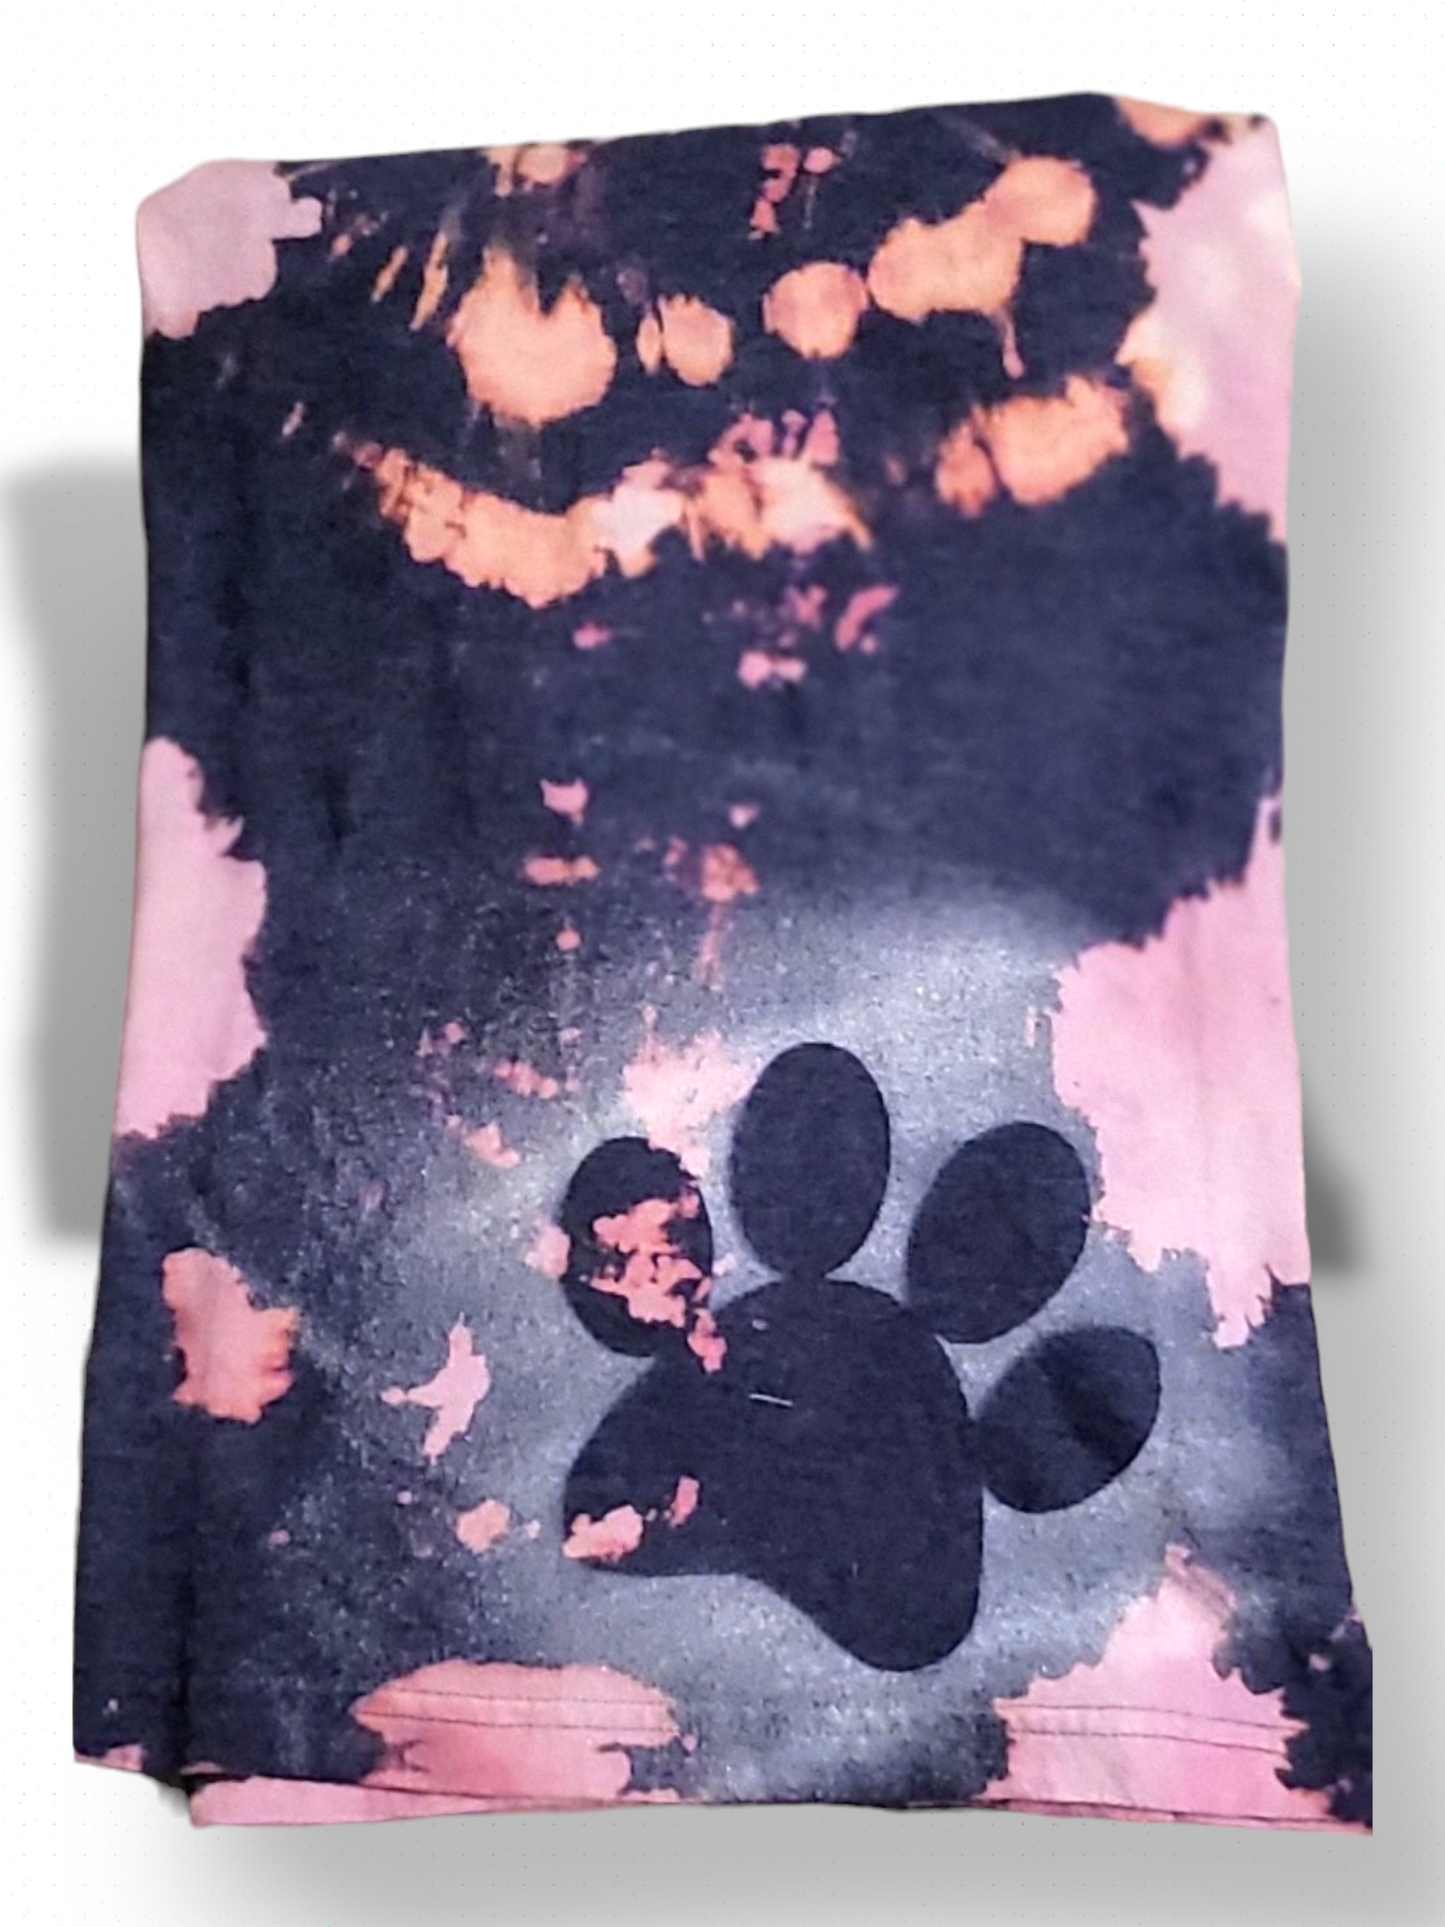 Heather Blue Tie Dyed XL T-Shirt with Painted Paw